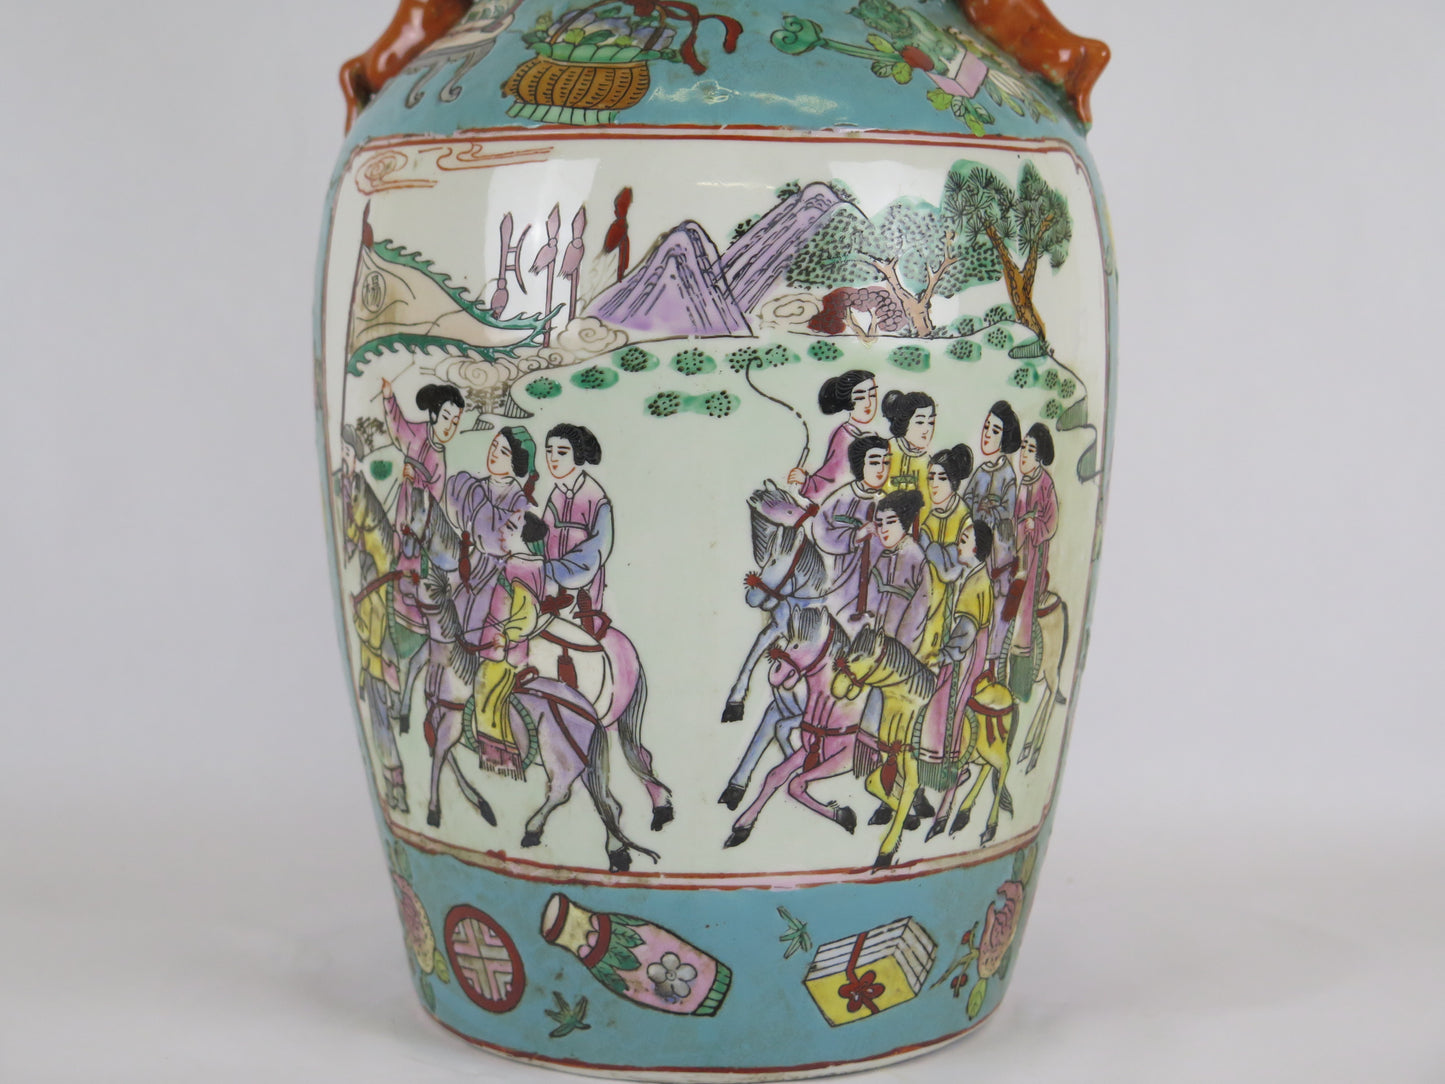 Chinese hand-painted ceramic vase with flowers and characters, vintage landscapes, collectible vase for home decoration CM5